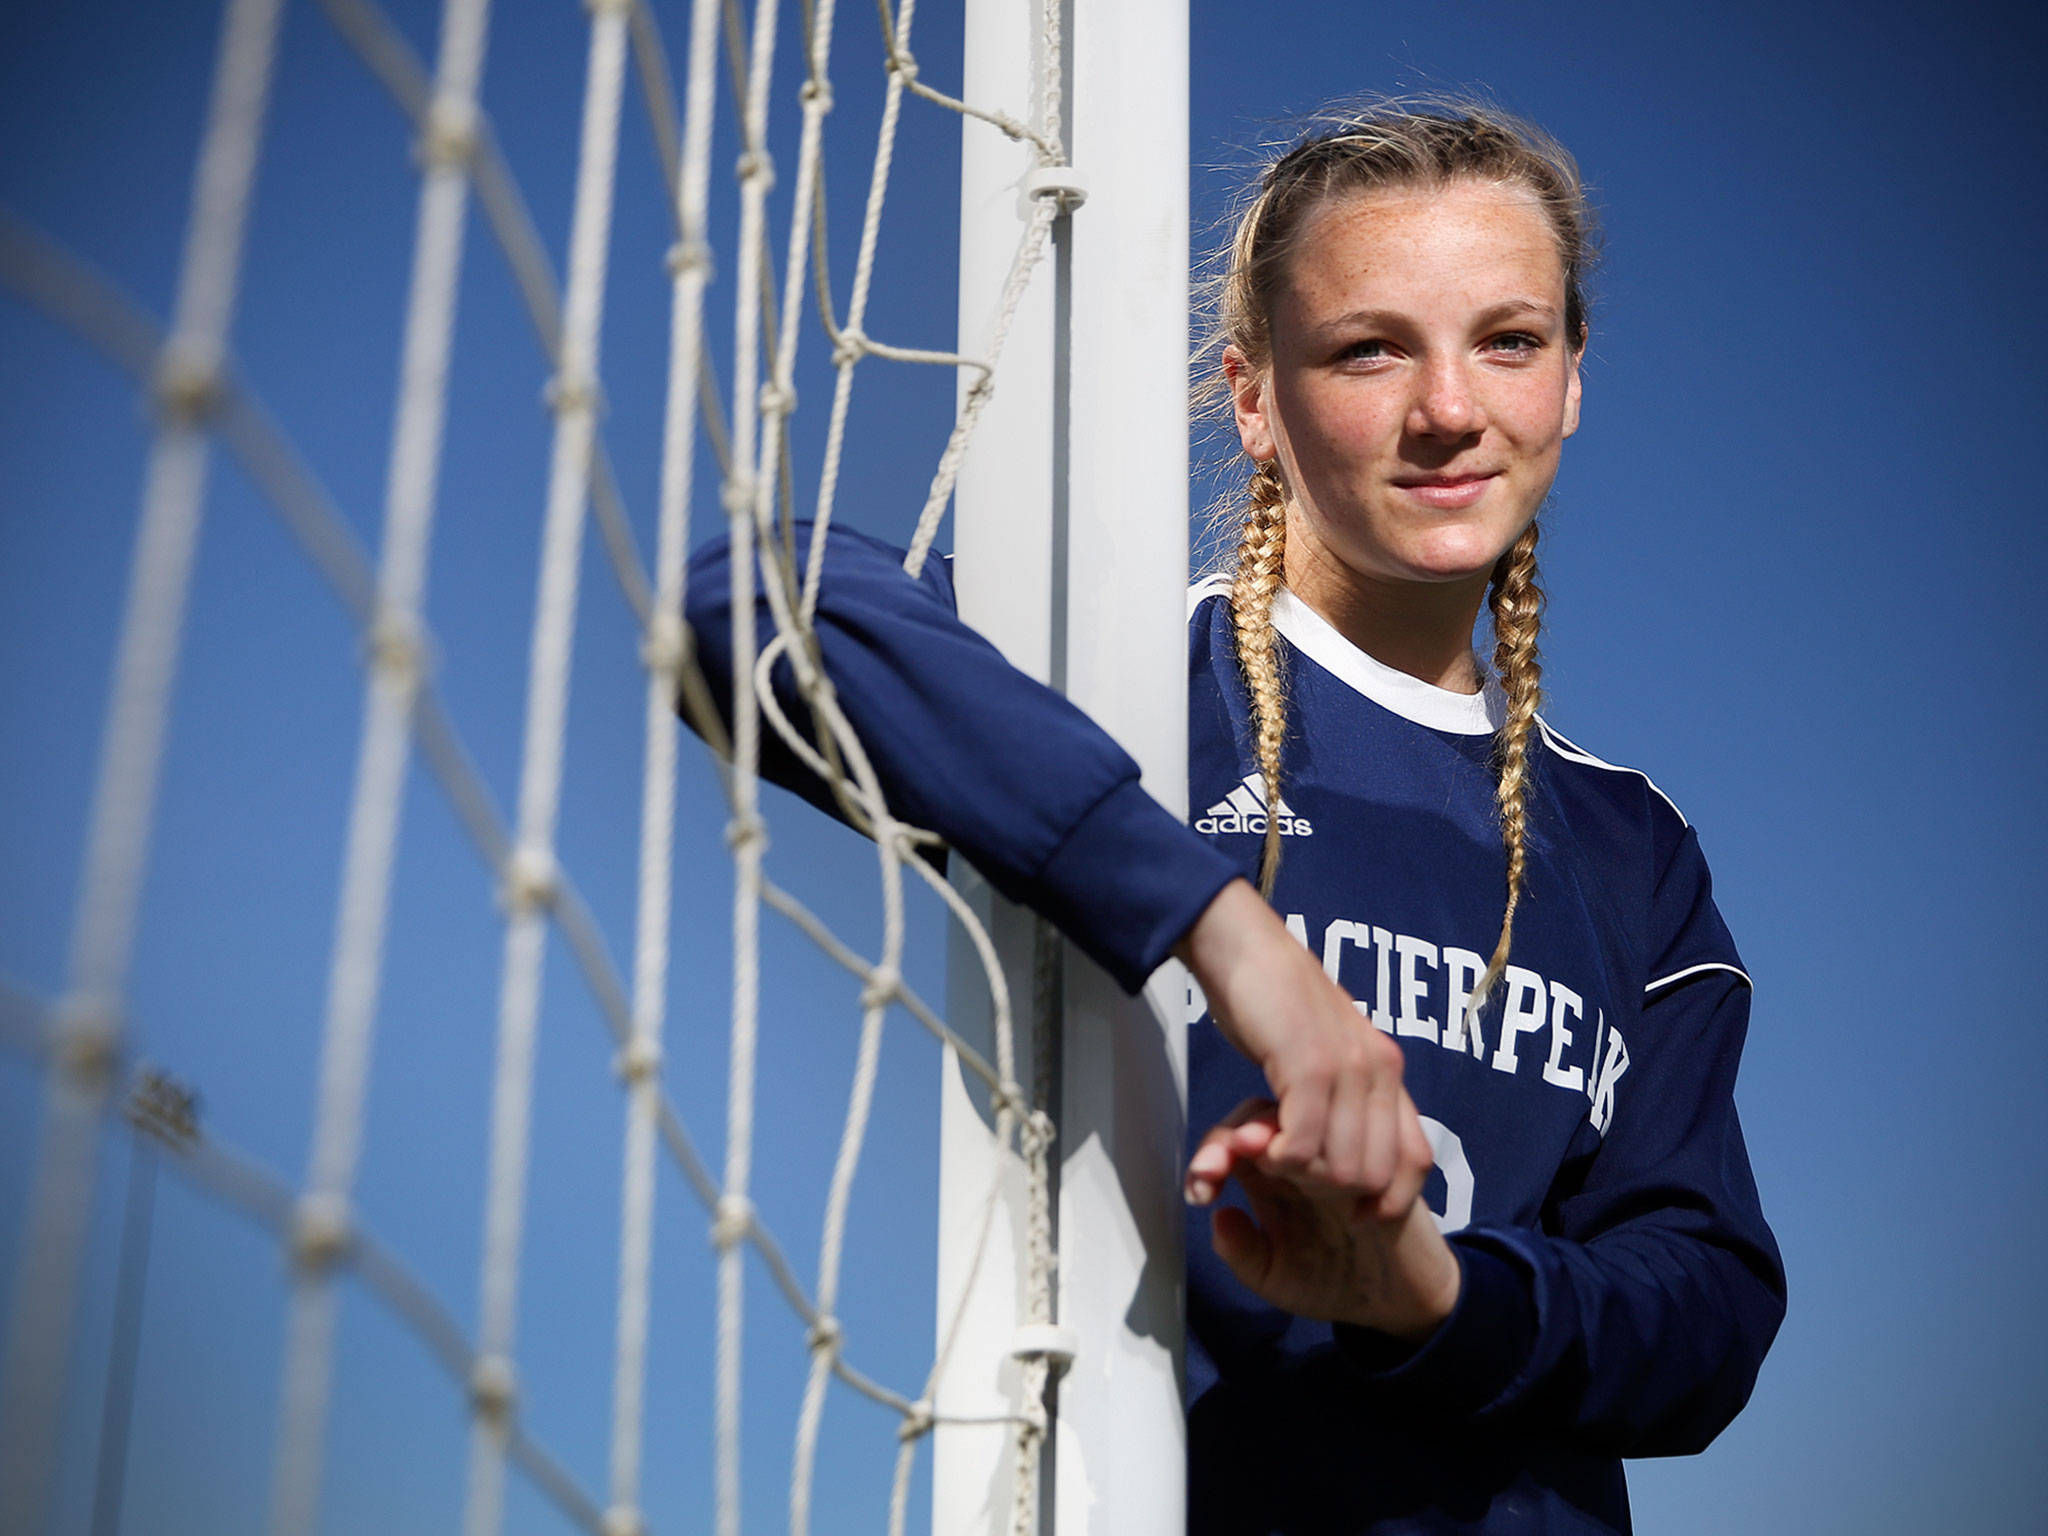 Glacier Peak junior Chloe Seelhoff scored 12 goals and had seven assists for the Grizzlies during their shortened nine-game schedule. (Kevin Clark / The Herald)